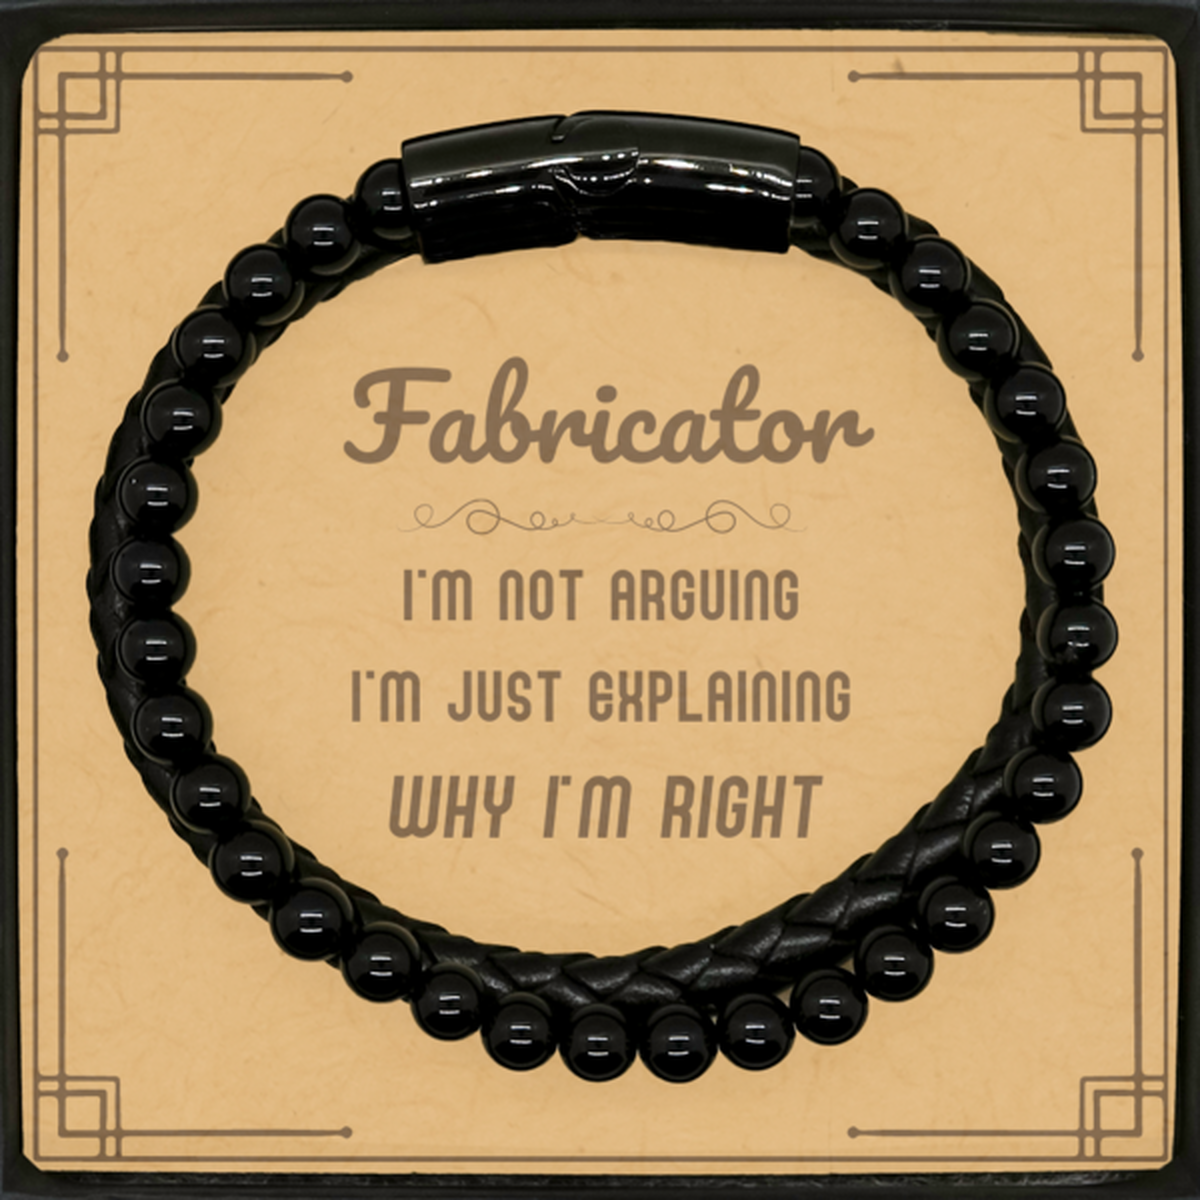 Fabricator I'm not Arguing. I'm Just Explaining Why I'm RIGHT Stone Leather Bracelets, Funny Saying Quote Fabricator Gifts For Fabricator Message Card Graduation Birthday Christmas Gifts for Men Women Coworker